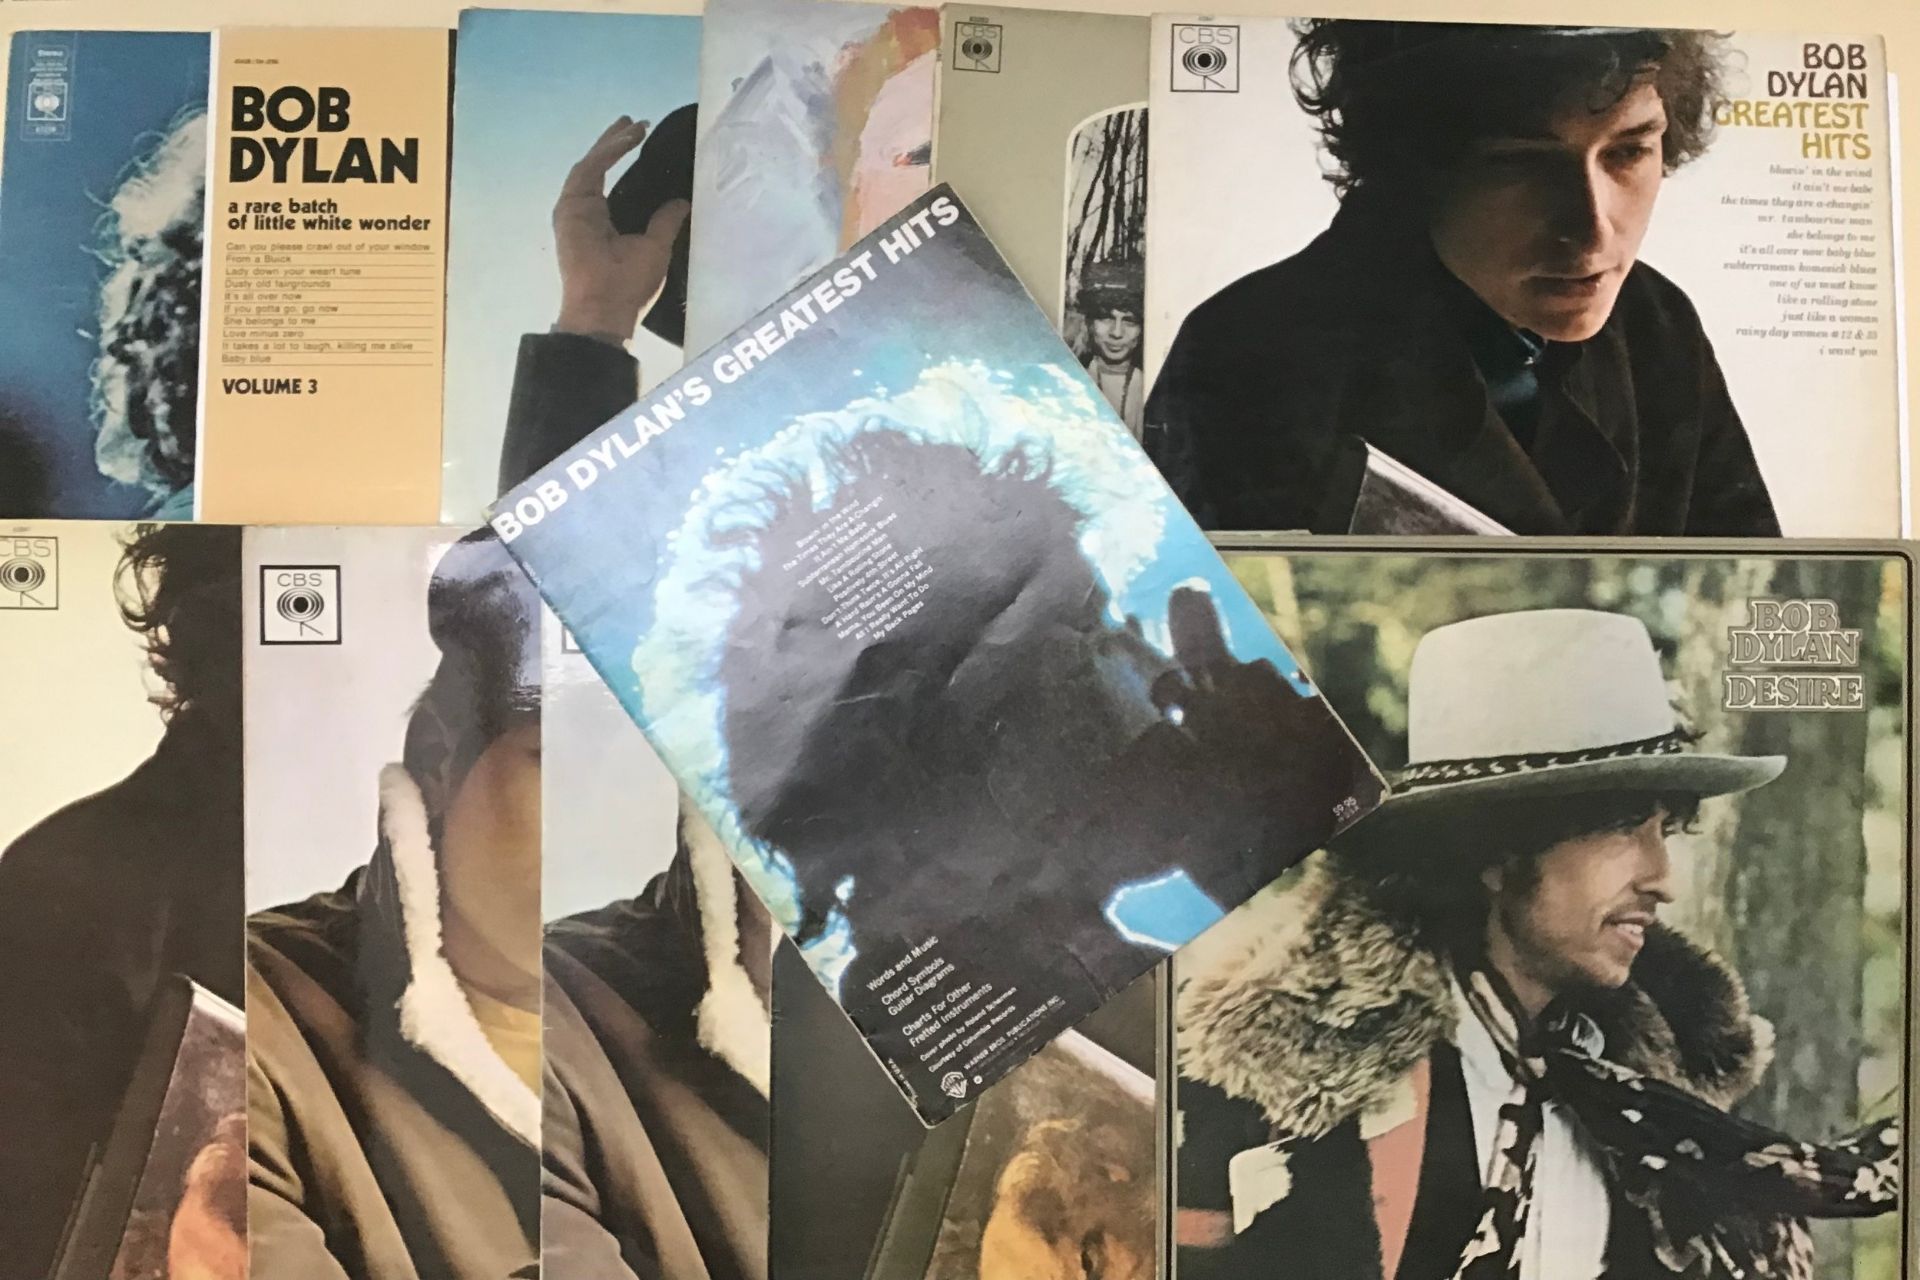 COLLECTION OF BOB DYLAN LP VINYL RECORDS. Here we have 11 albums from Mr Dylan to include - Greatest